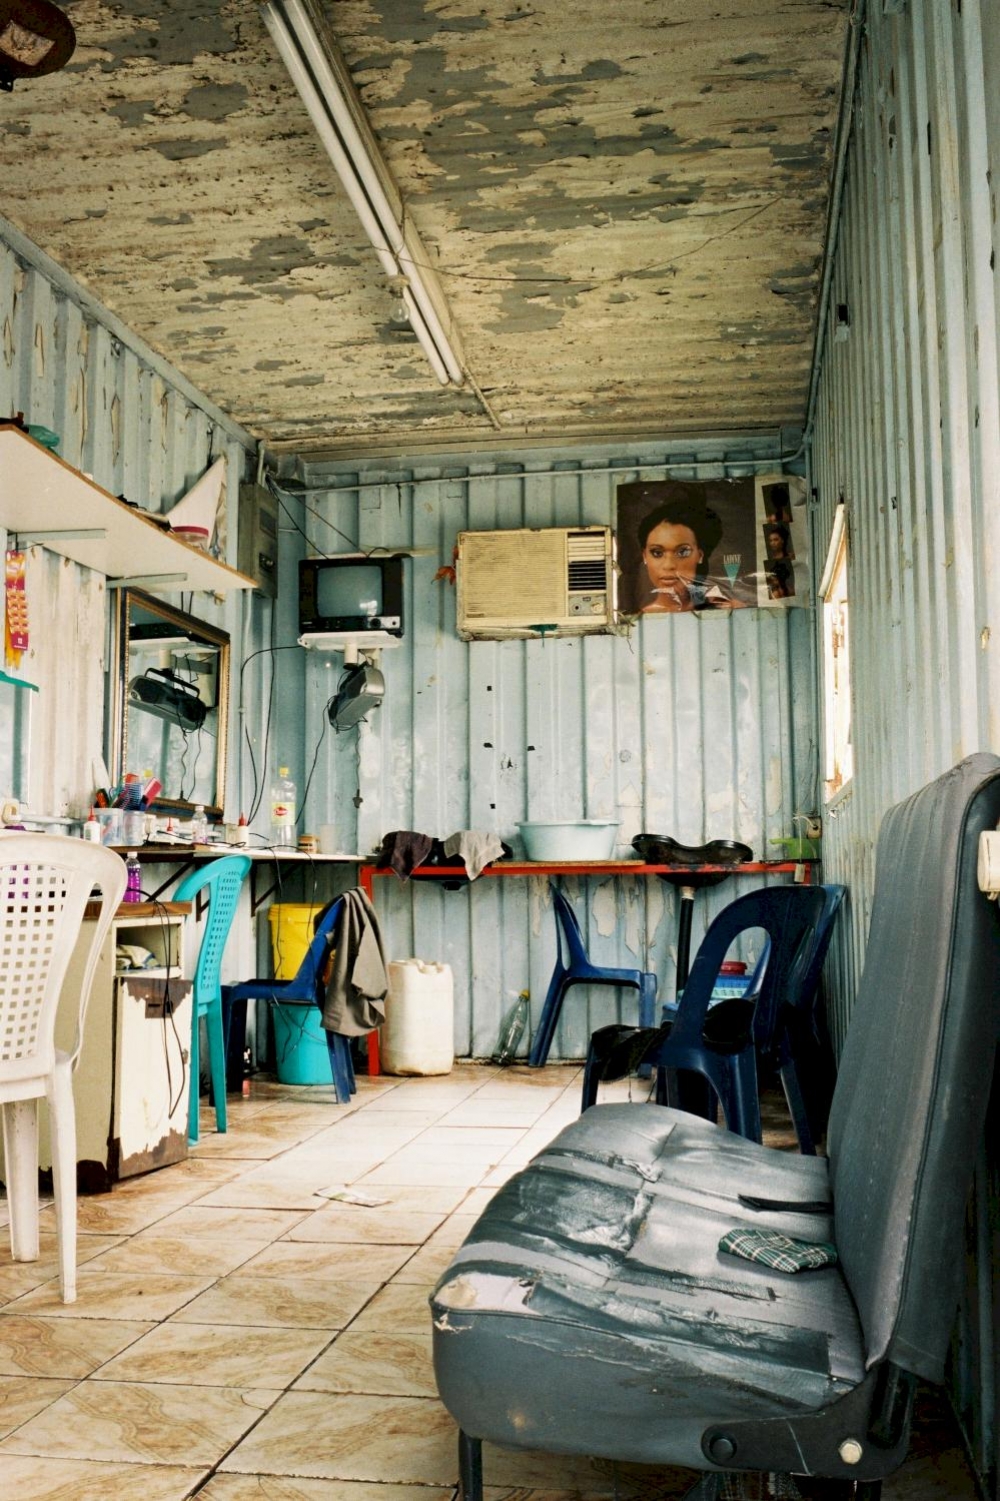 Hair Salons in Shipping Containers: Thriving Micro-Enterprises in